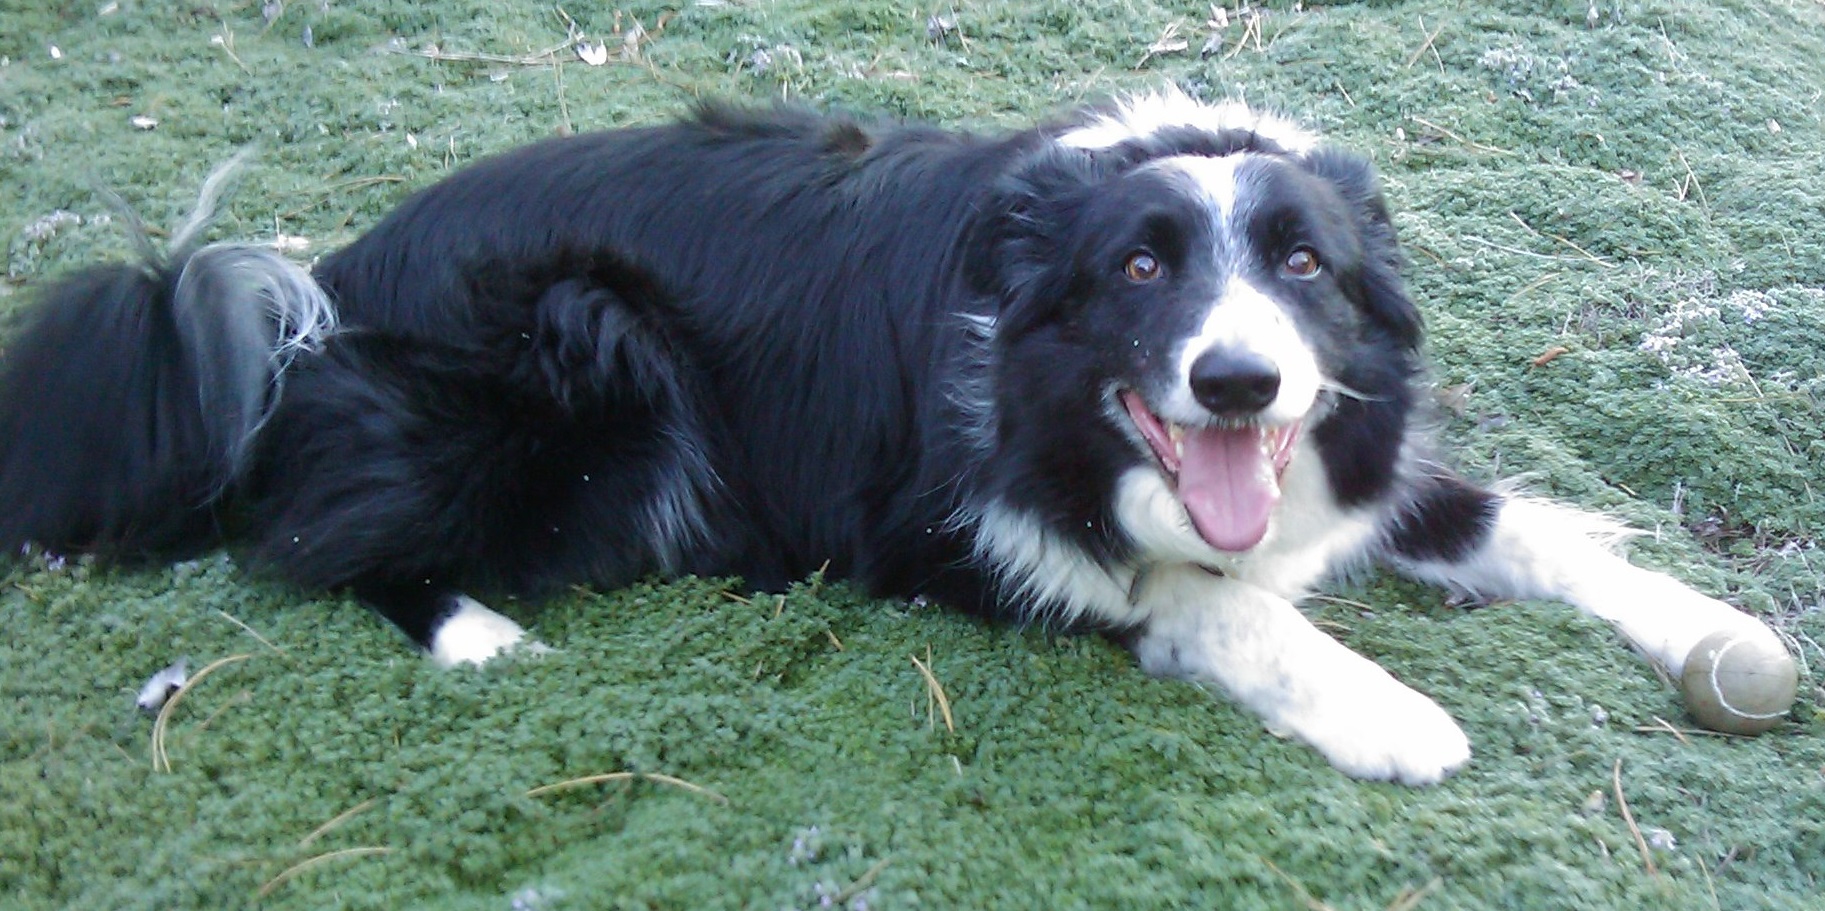 Carl, a border collie looking at you with sparkling eyes and a smile of anticipation, lying on some green groundcover with ball between his front paws